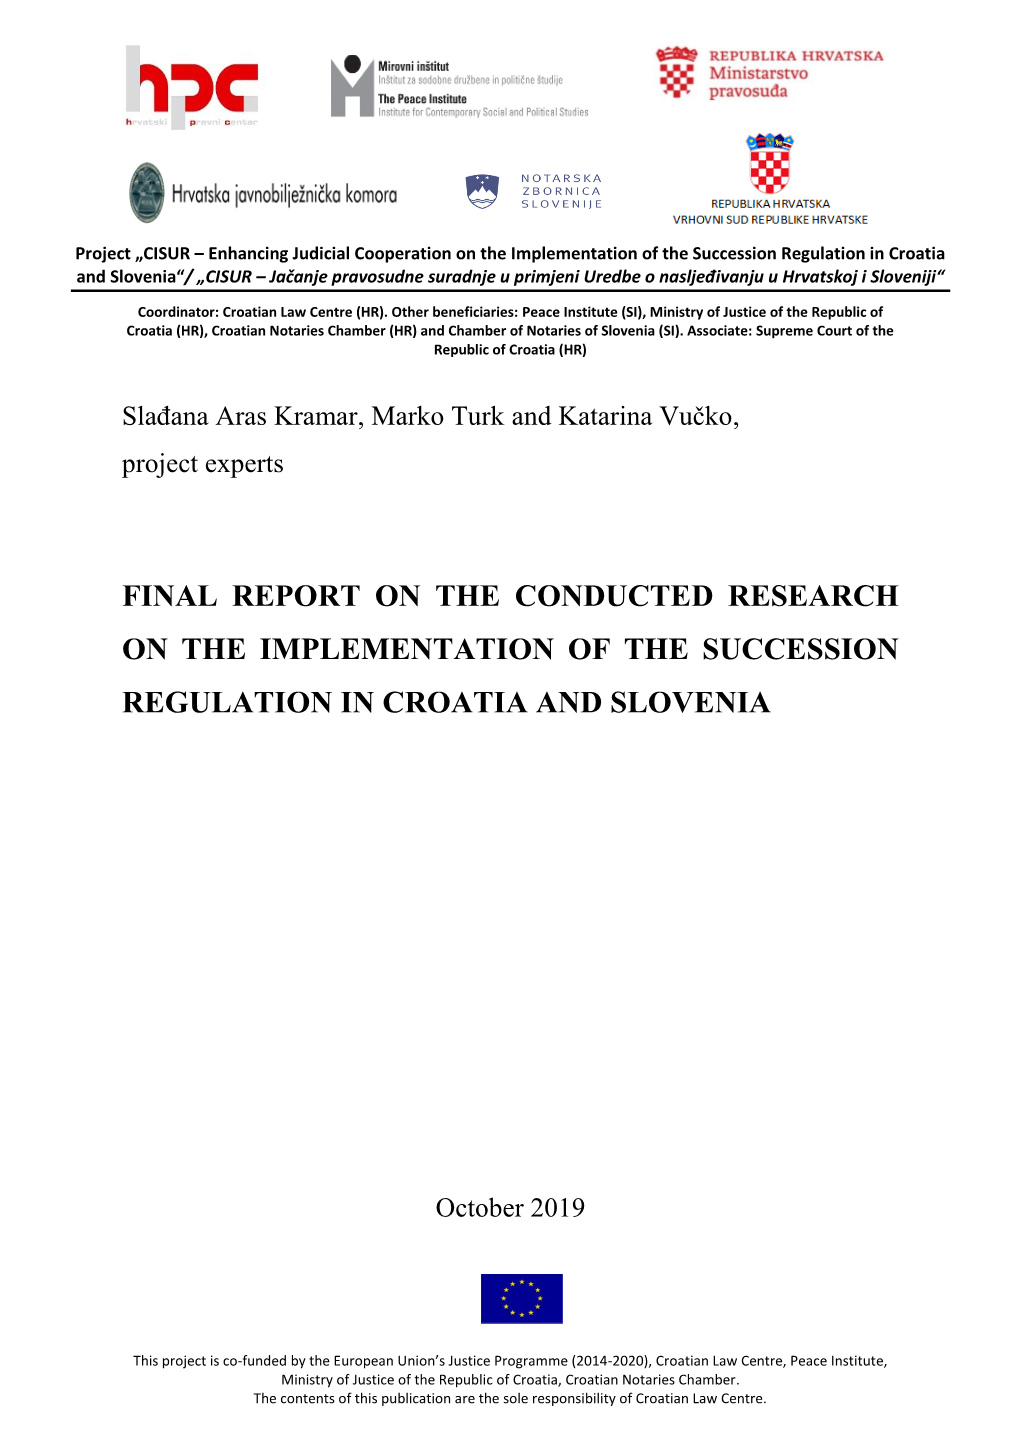 Final Report on the Conducted Research on the Implementation of the Succession Regulation in Croatia and Slovenia